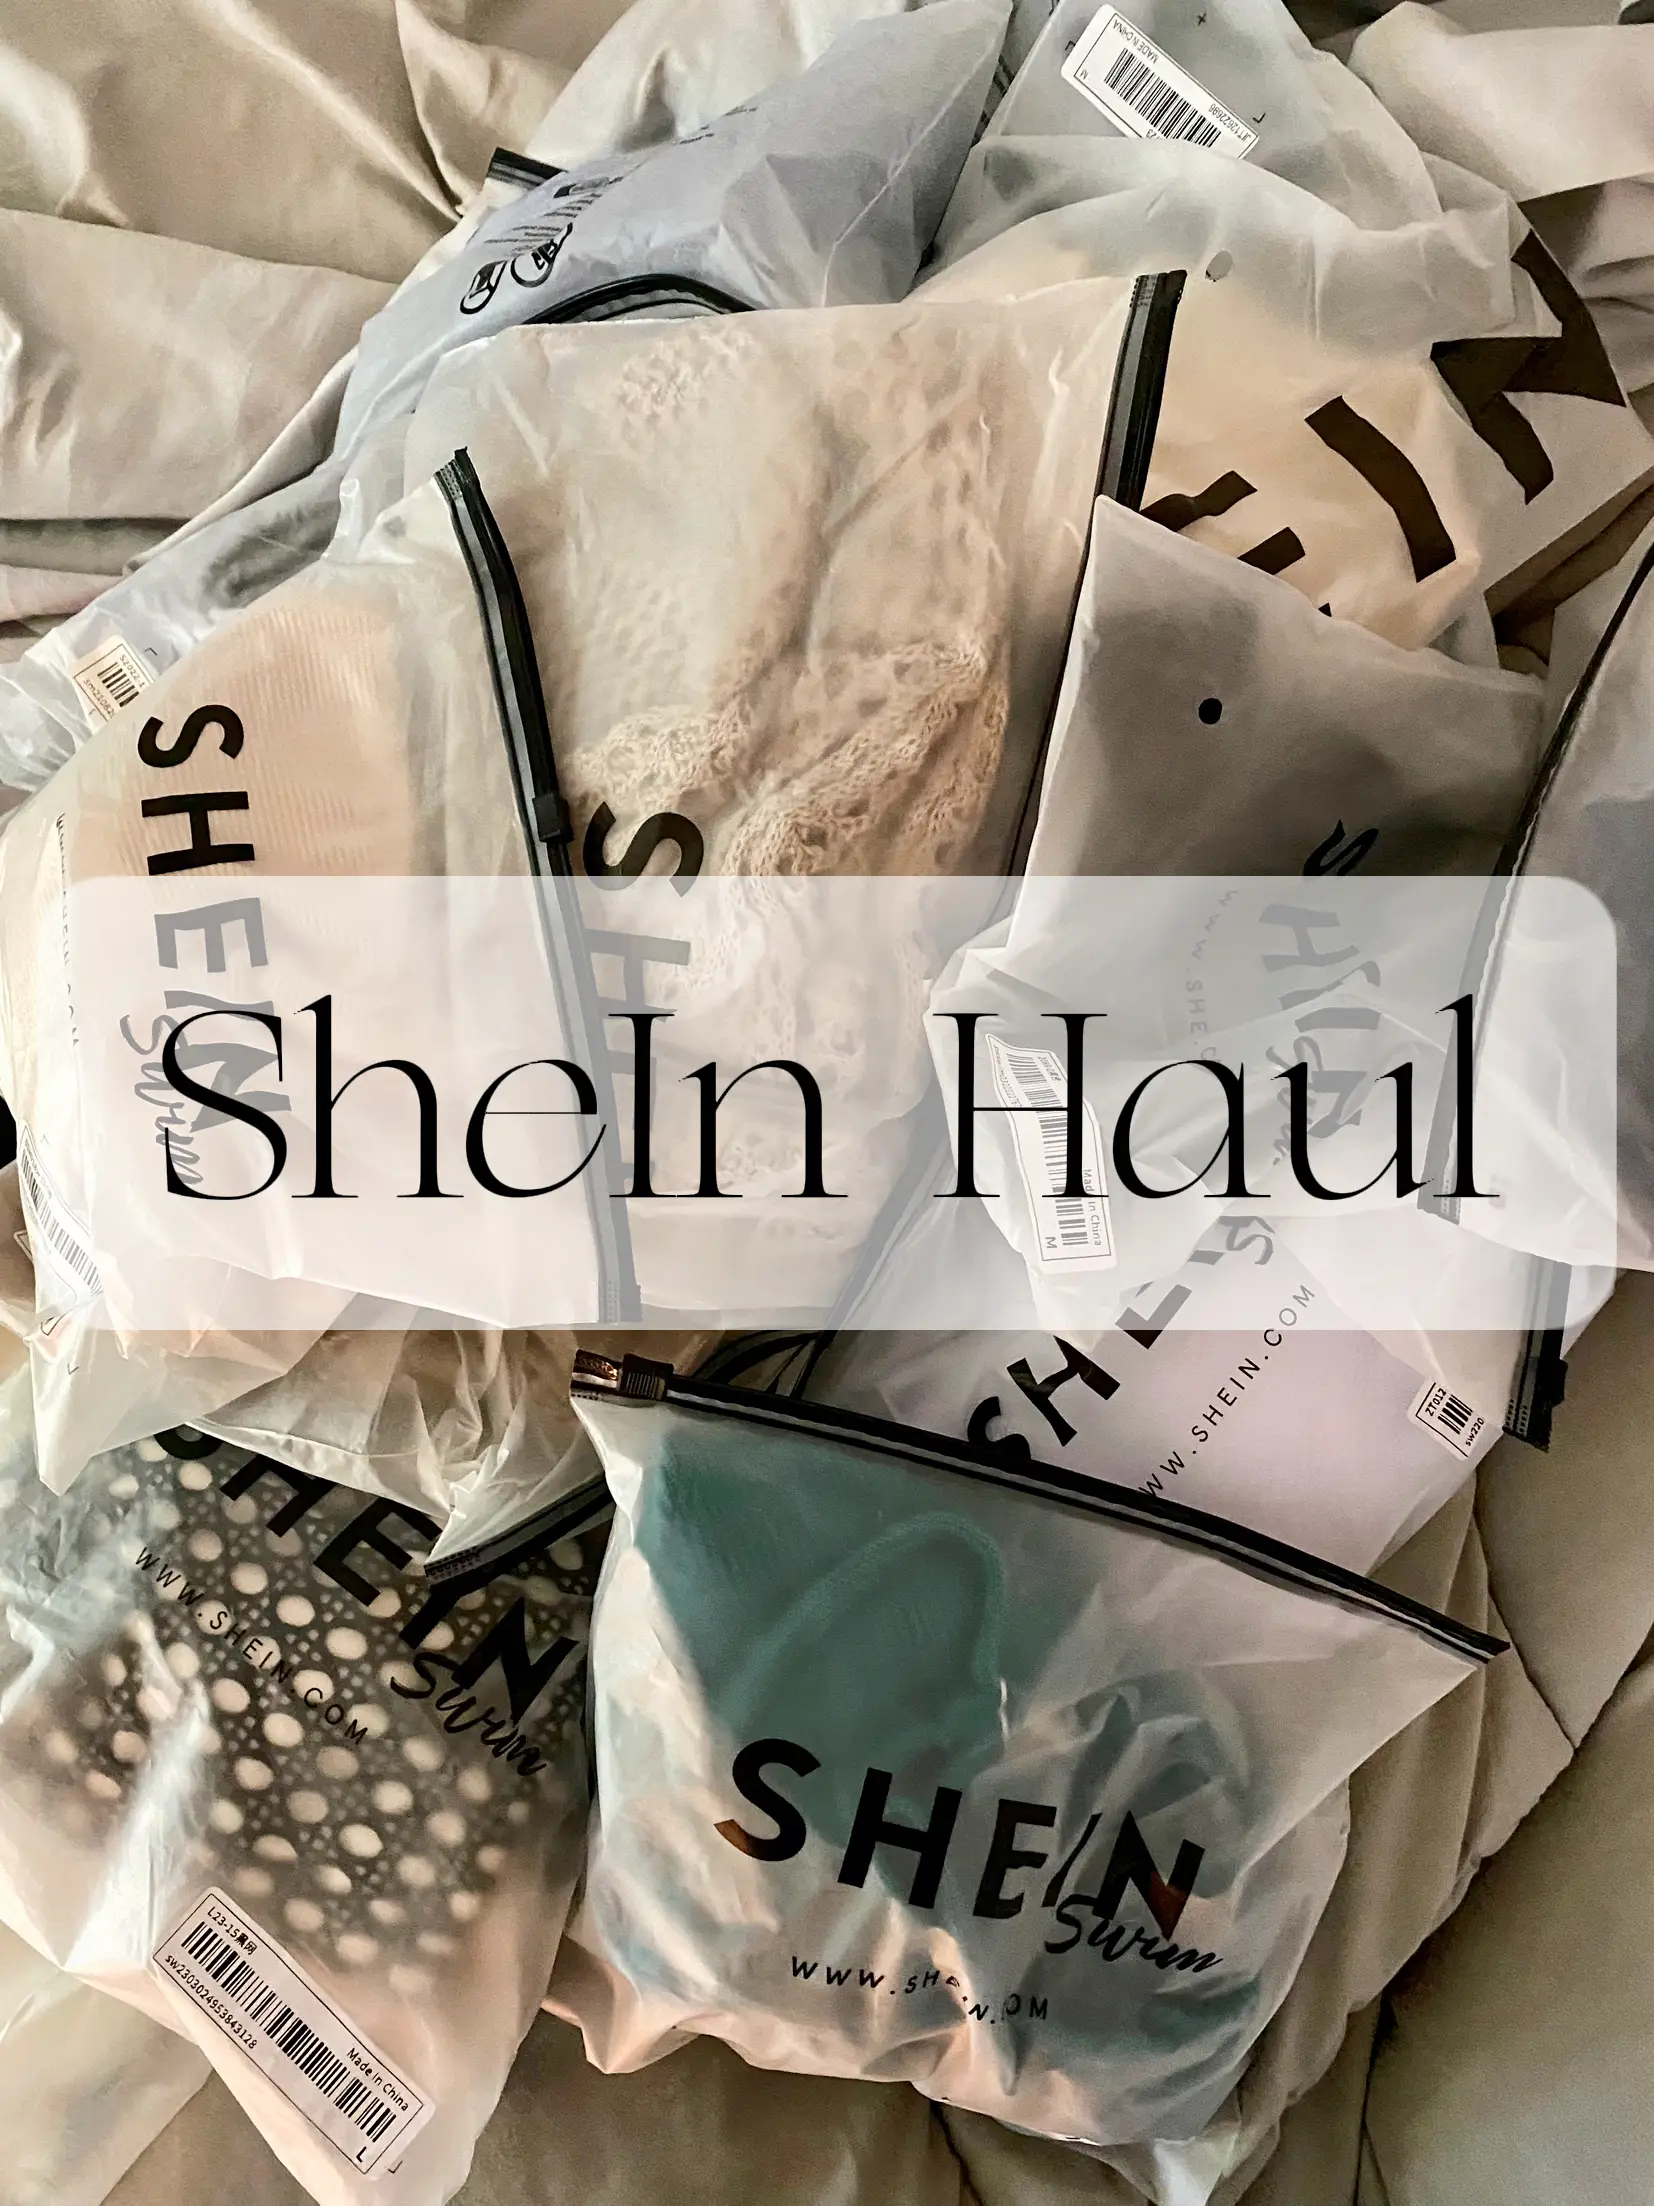 ✨SheIn Haul✨, Gallery posted by Olivia